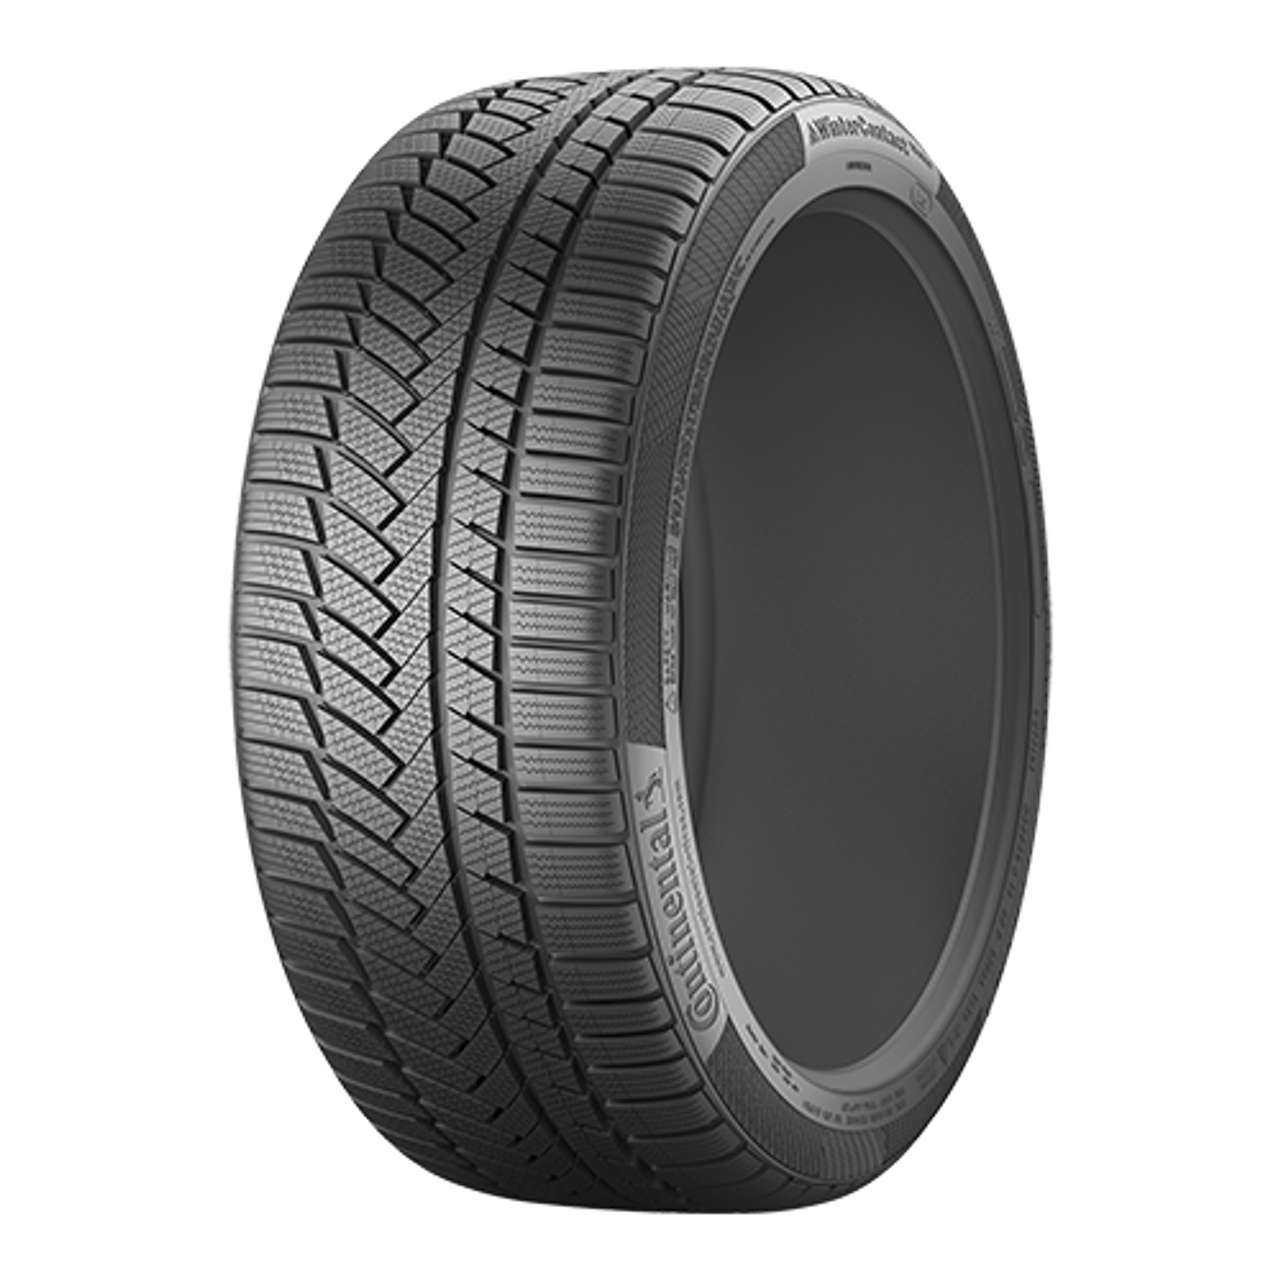 CONTINENTAL WINTERCONTACT TS 850 P (MO) 235/55R19 105H BSW von Continental